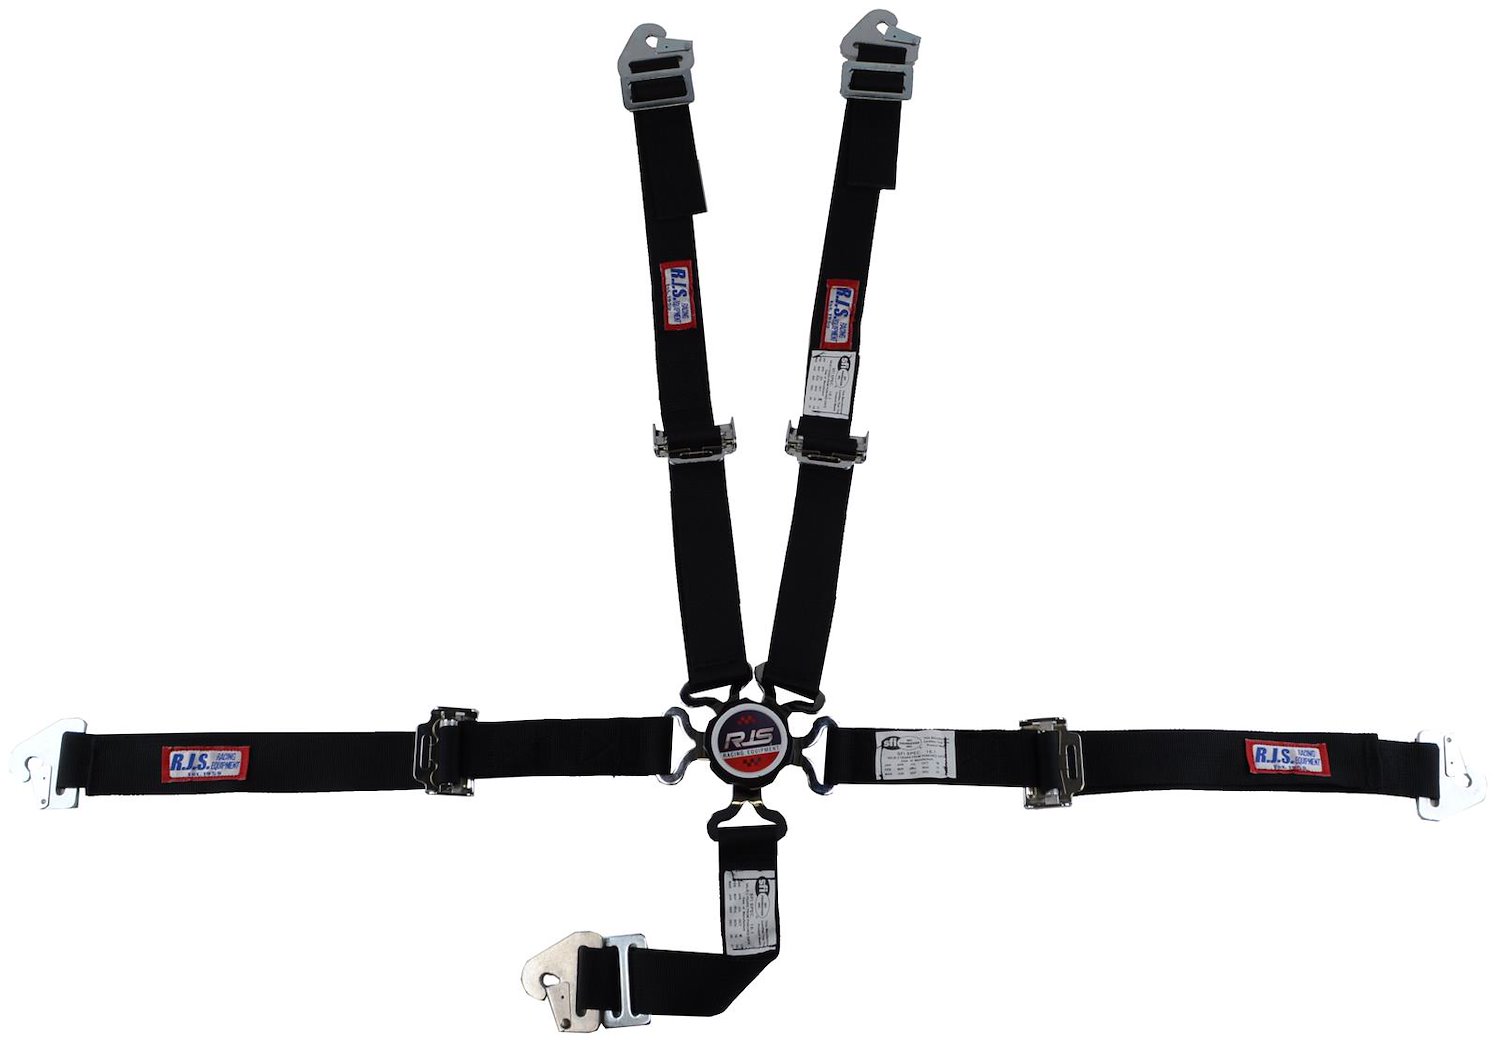 SFI 16.1 CAM-LOCK HARNESS 2 PULL UP Lap Belt 2 Shoulder Harness V ROLL BAR Mount 2 SINGLE Sub ALL SNAP ENDS YELLOW